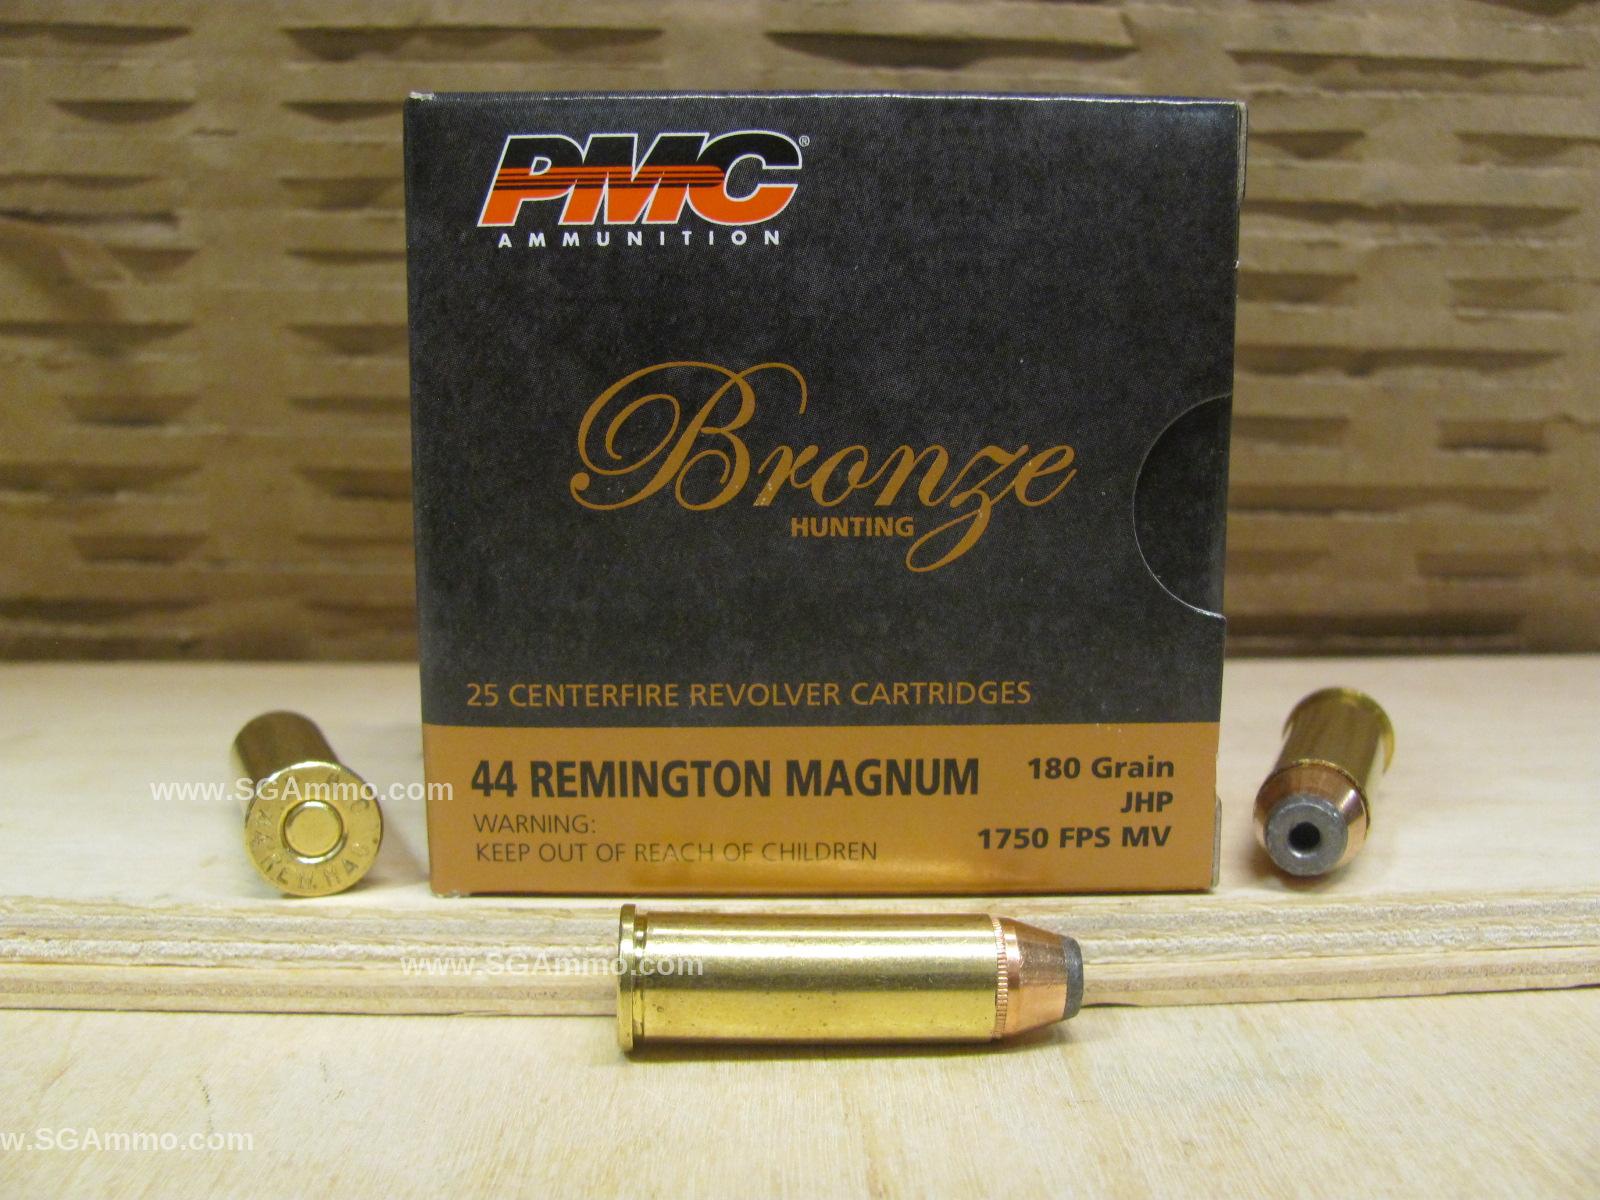 200 Round Plastic Can - 44 Magnum PMC 180 Grain JHP Ammo - 44B - Packed in Small Plastic Canister